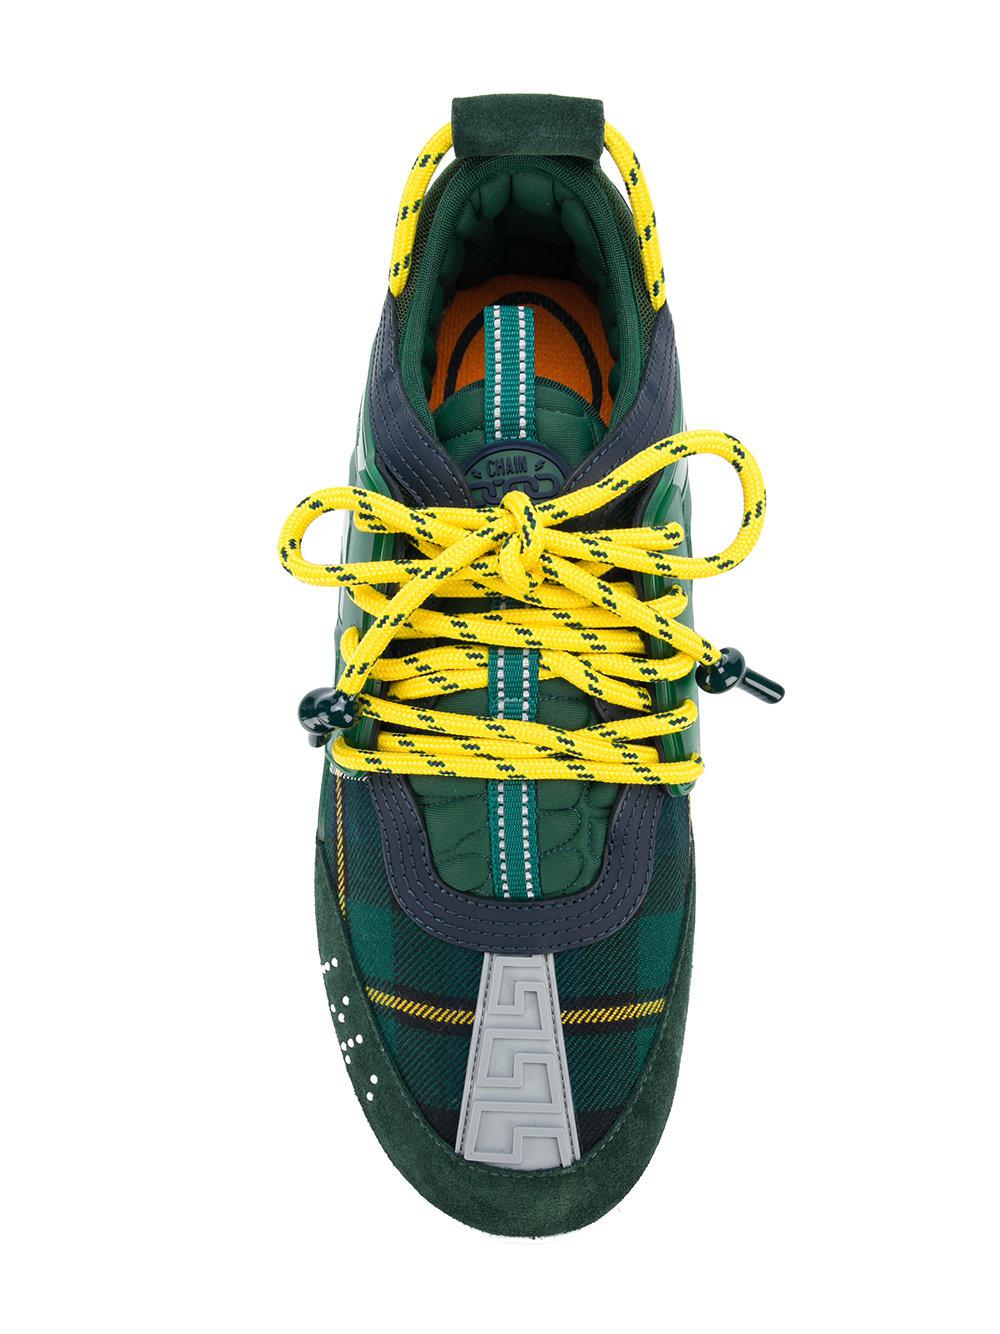 Versace Synthetic Chain Reaction Sneakers in Green for Men - Lyst